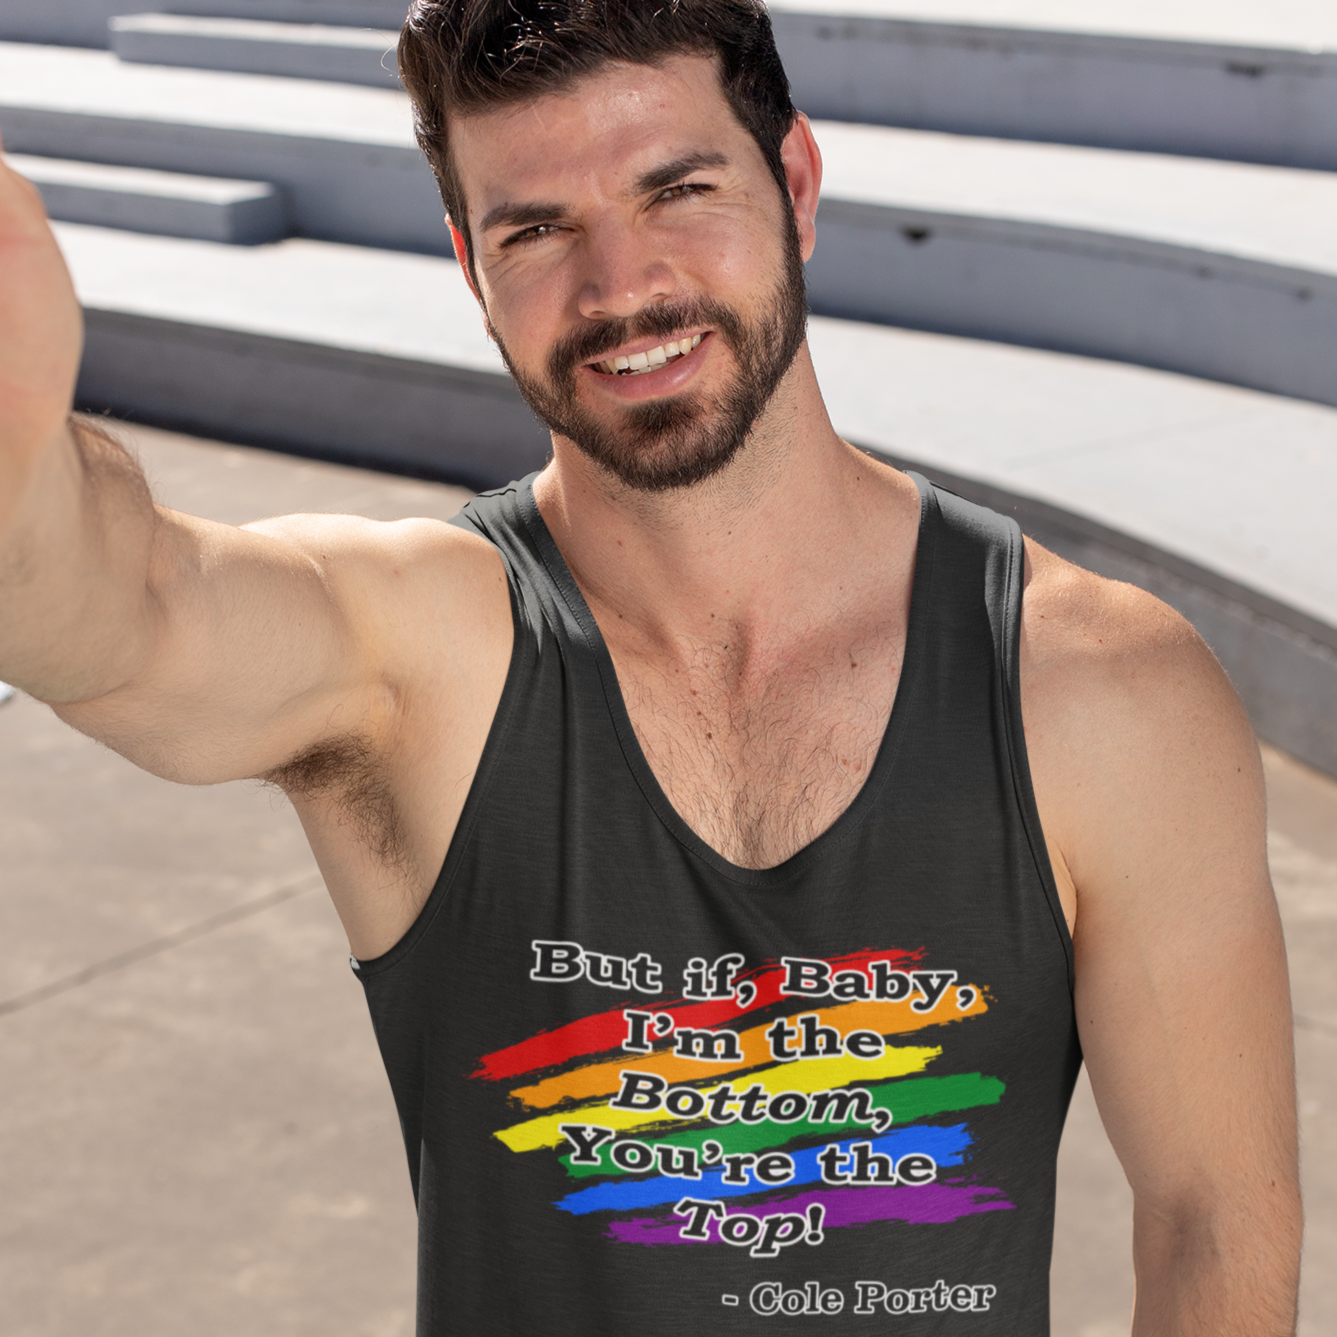 I'm the Bottom, You're the Top! Jersey Tank Top